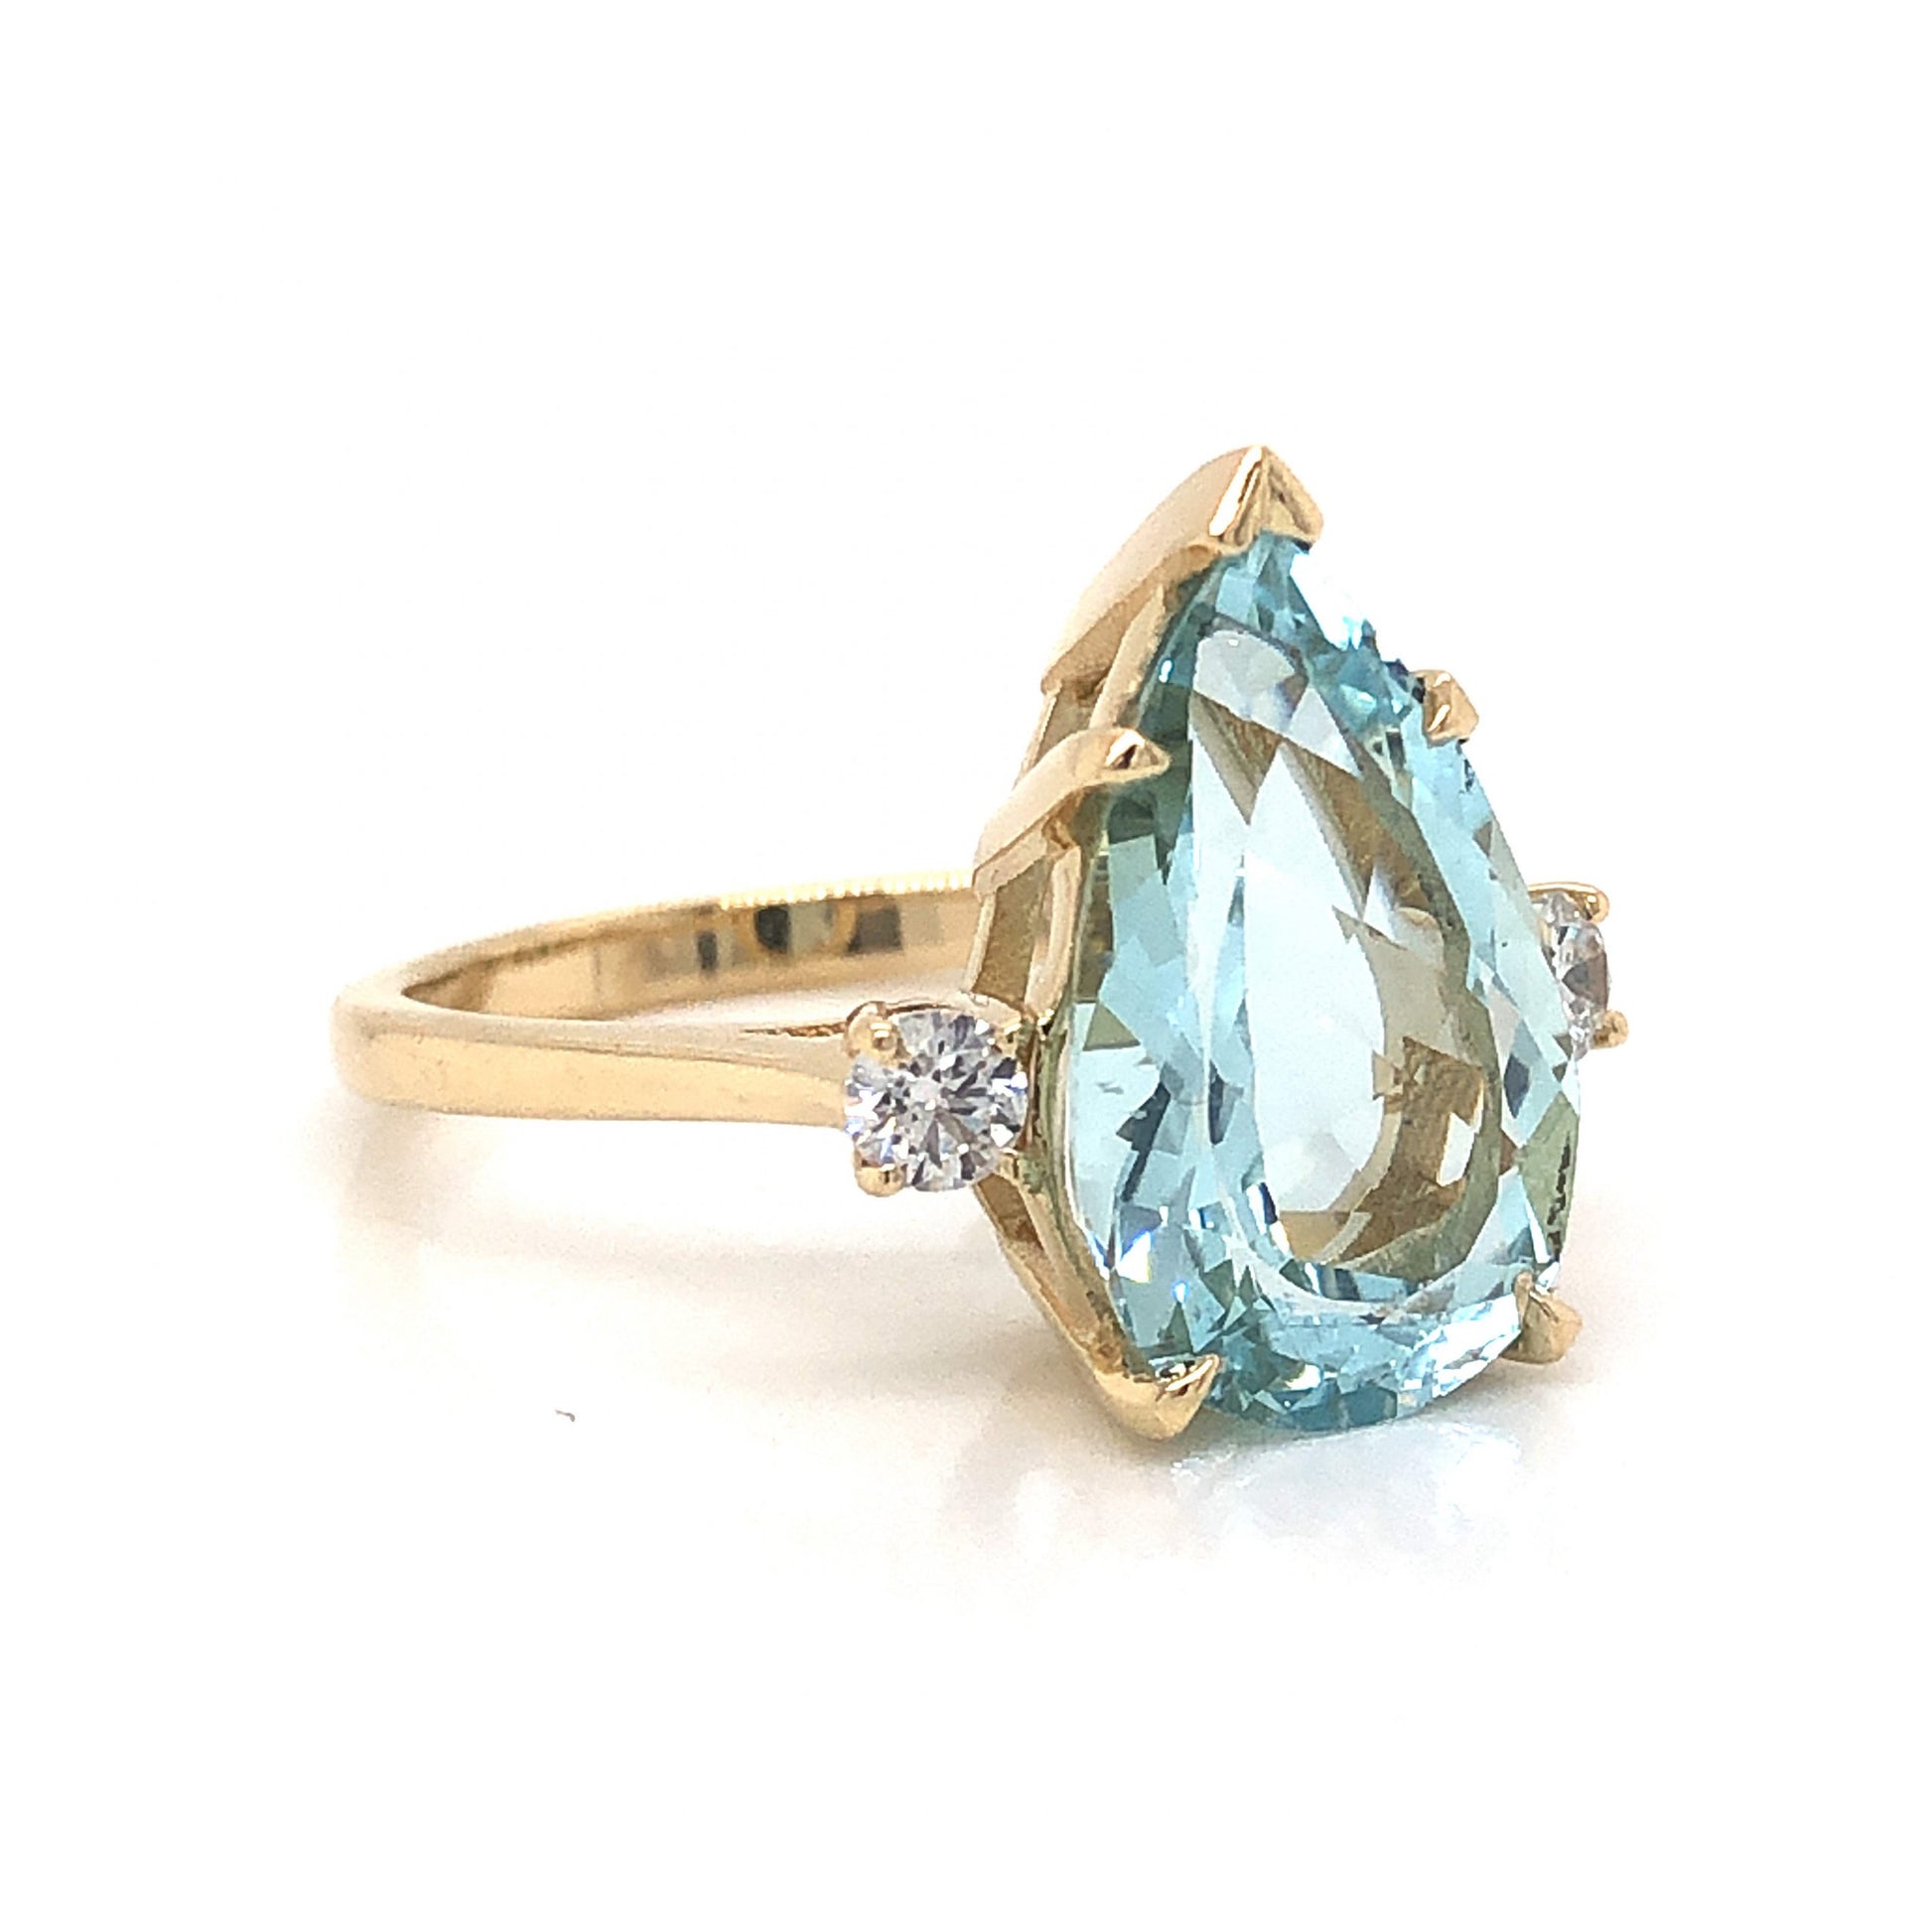 Pear Cut Aquamarine Engagement Ring in 14k Yellow GoldComposition: 14 Karat Yellow GoldRing Size: 6.75Total Diamond Weight: .18 ctTotal Gram Weight: 4.7 gInscription: 14K